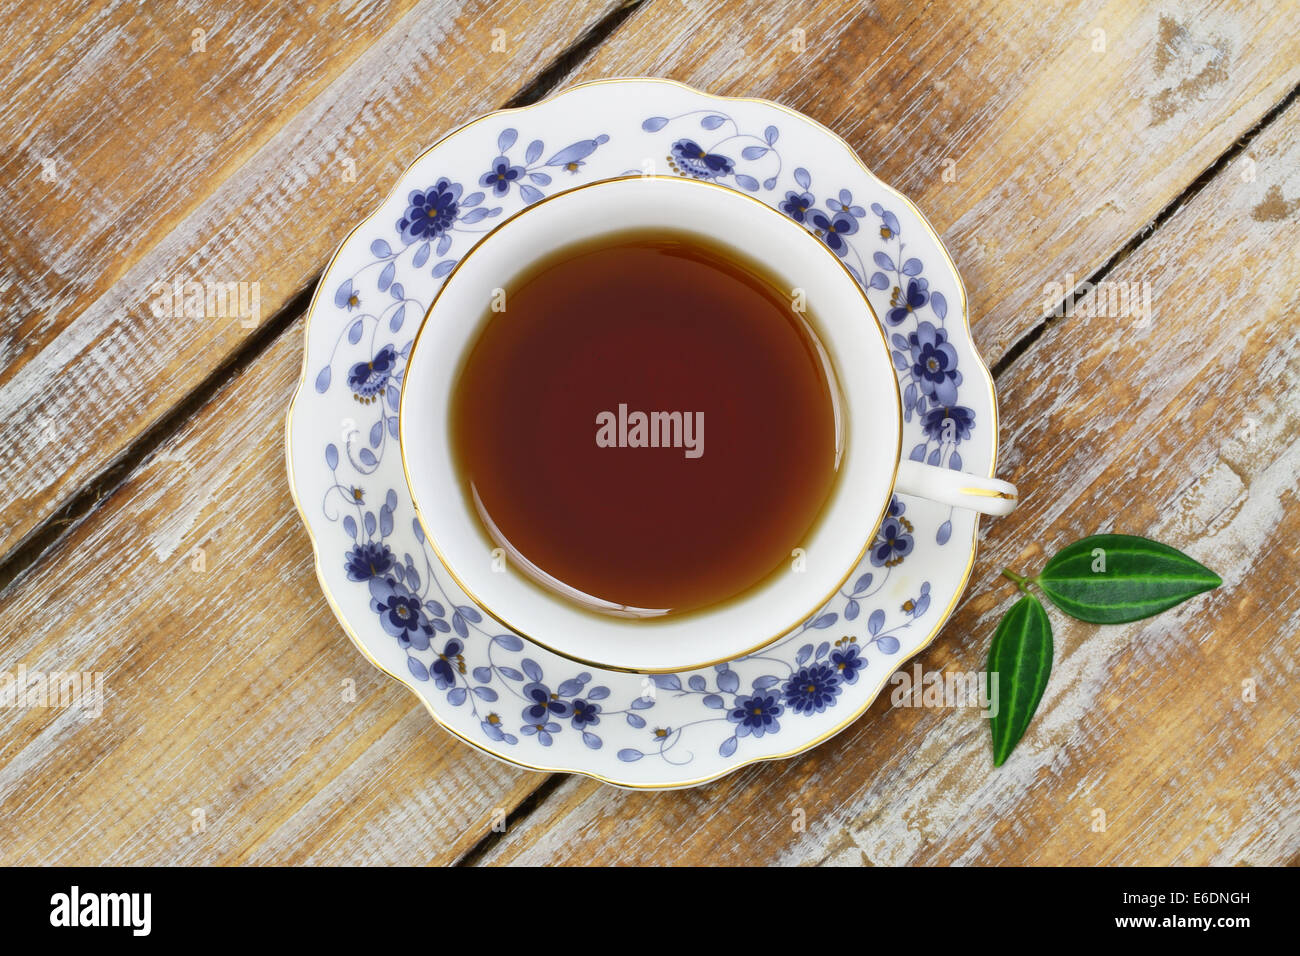 Tea in vintage cup on wooden surface Stock Photo